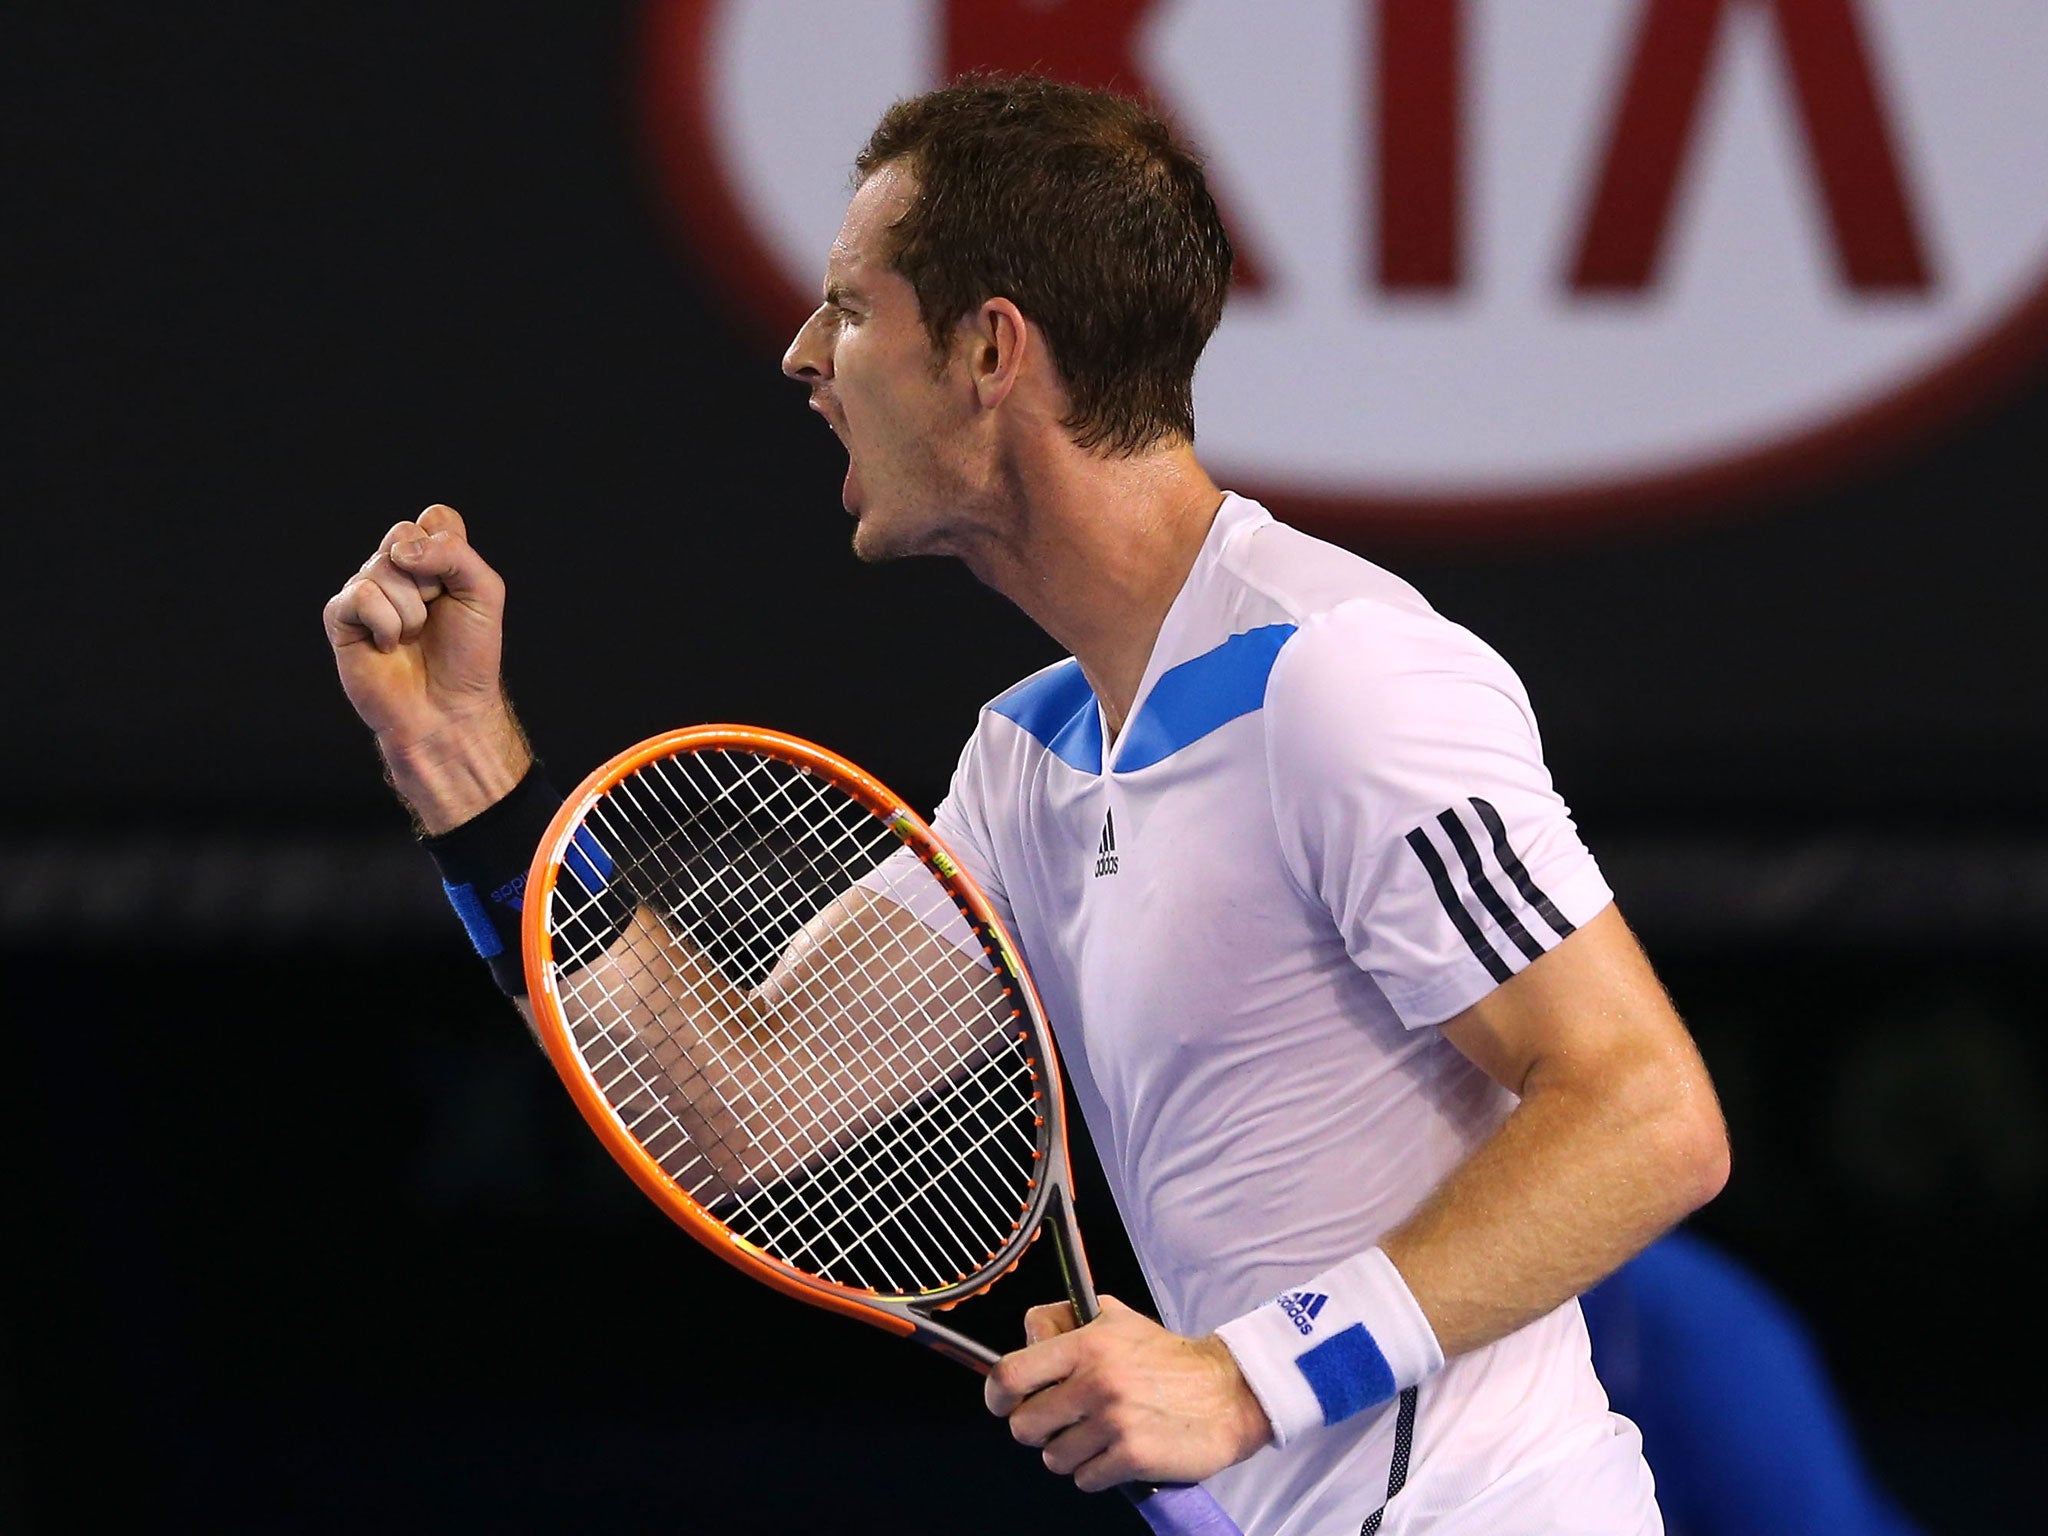 Andy Murray celebrates his victory over Vincent Mallot in the second round of the Australian Open